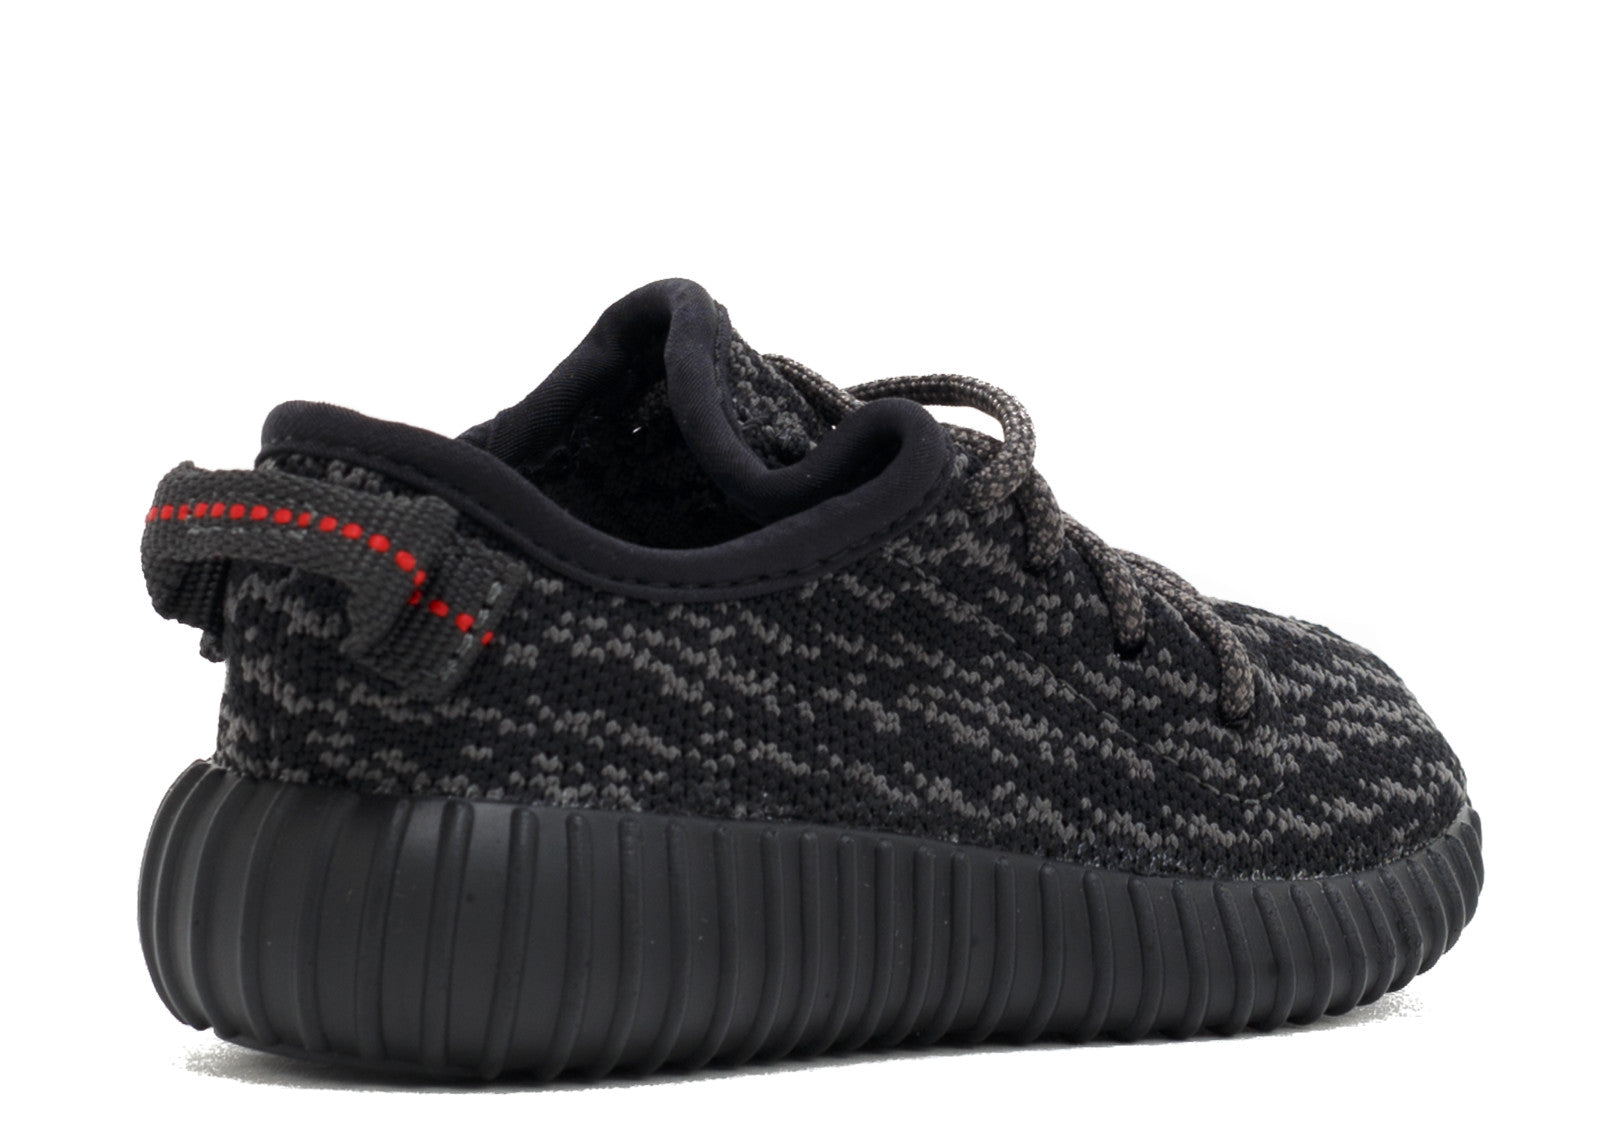 Adidas Yeezy Boost 350 Infant 'Pirate Black'